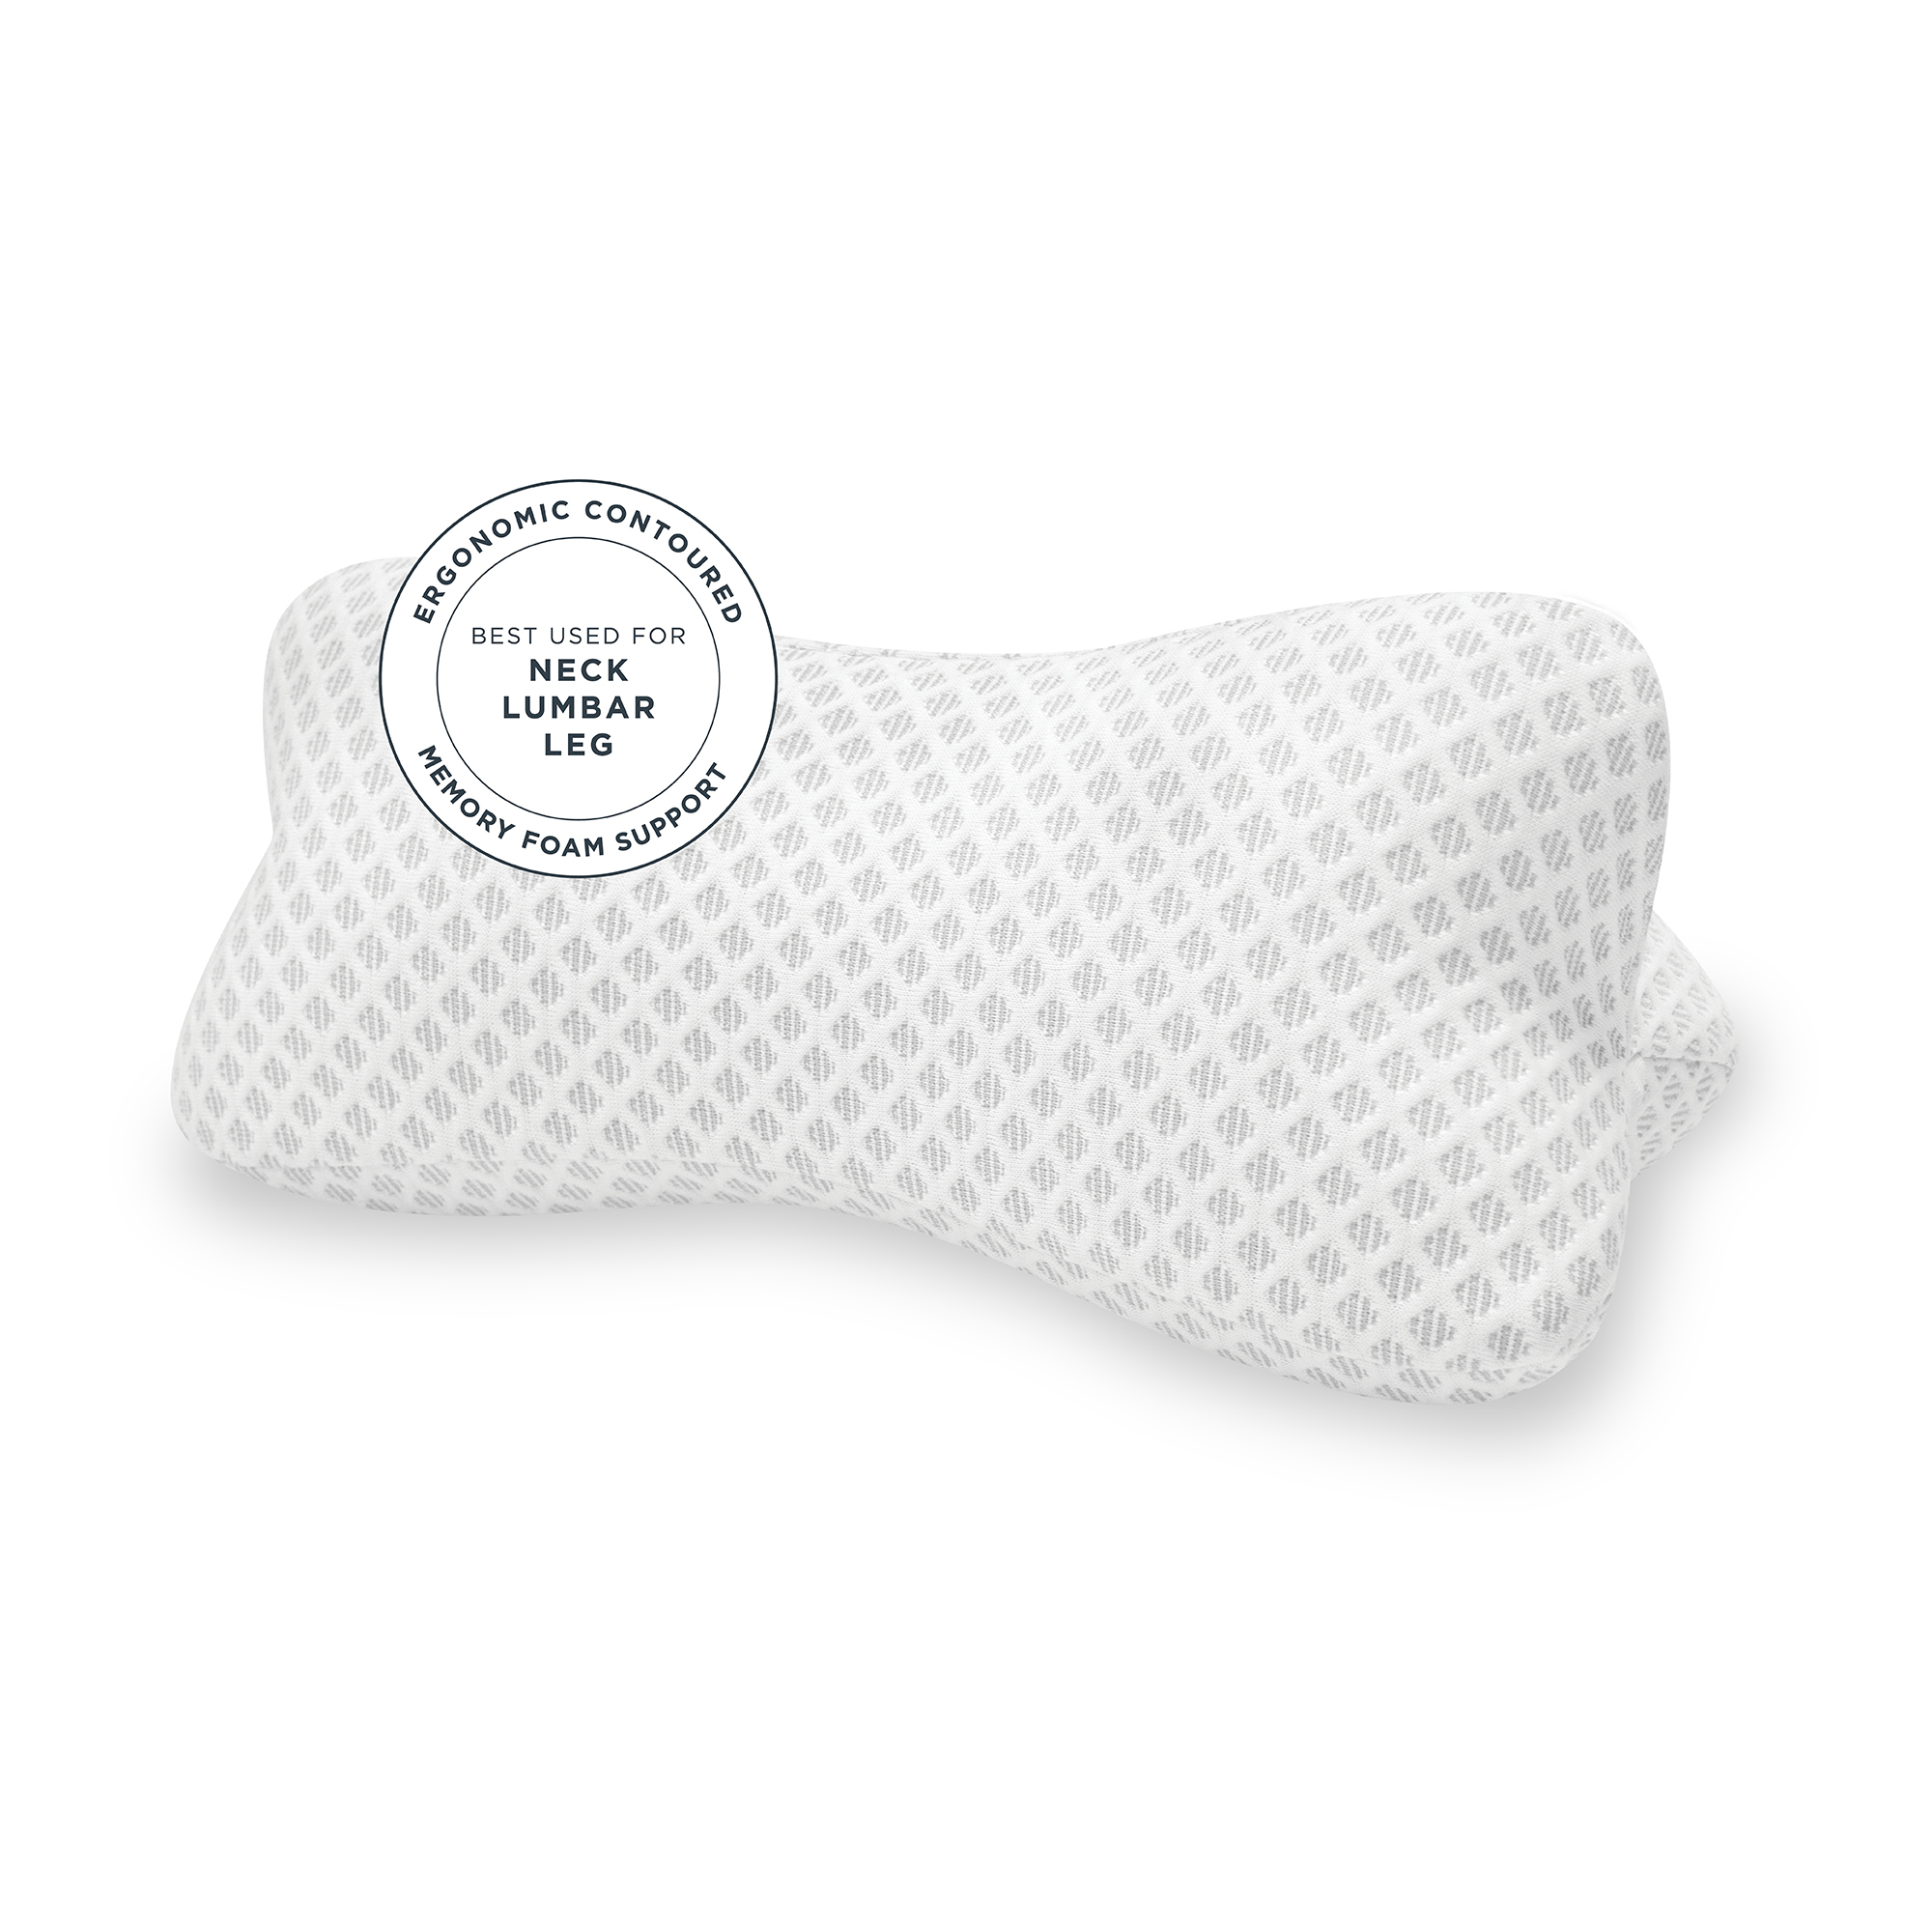 Biopedic Supportive Memory Foam Bone-Shaped Knee Pillow With Adjustable Strap - image 1 of 6